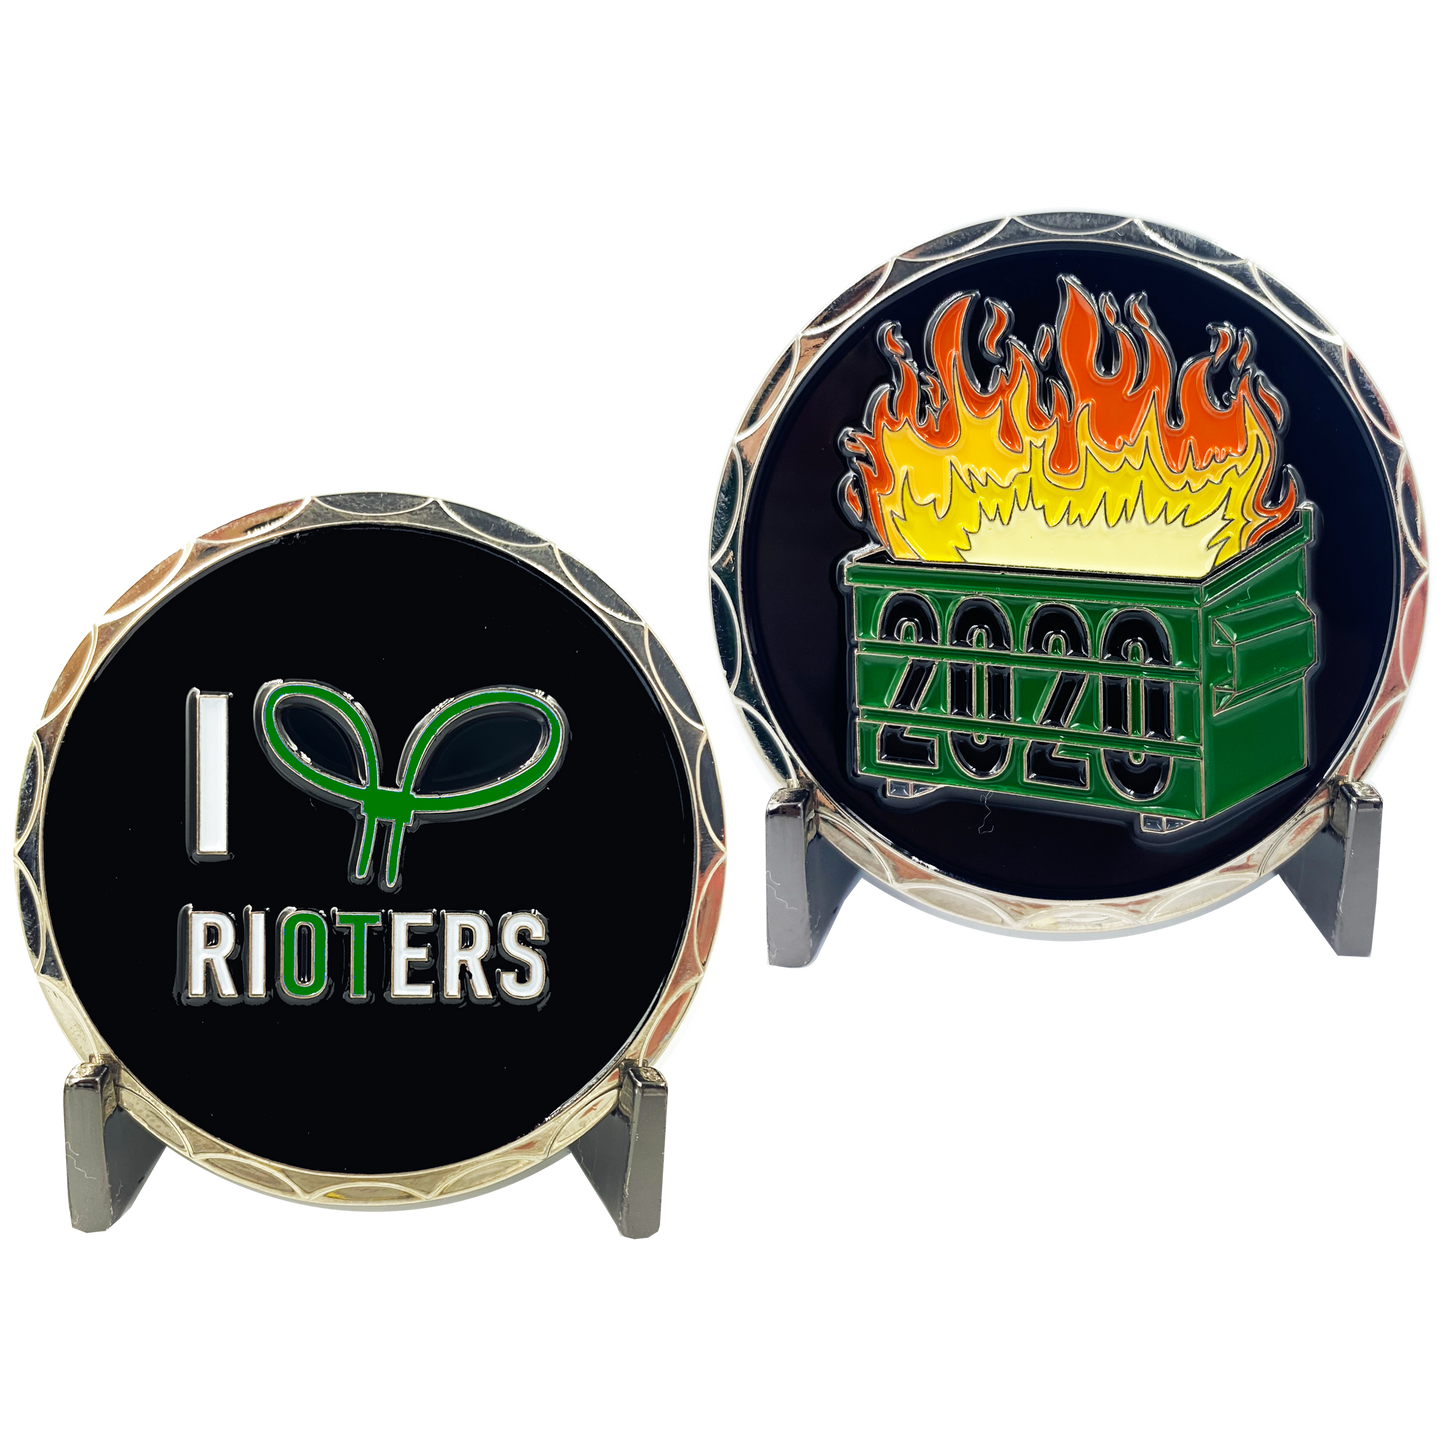 DL2-05 I Love Rioters 2020 Dumpster Fire Handcuff Zip Ties Police Thin Green Line Overtime Challenge Coin